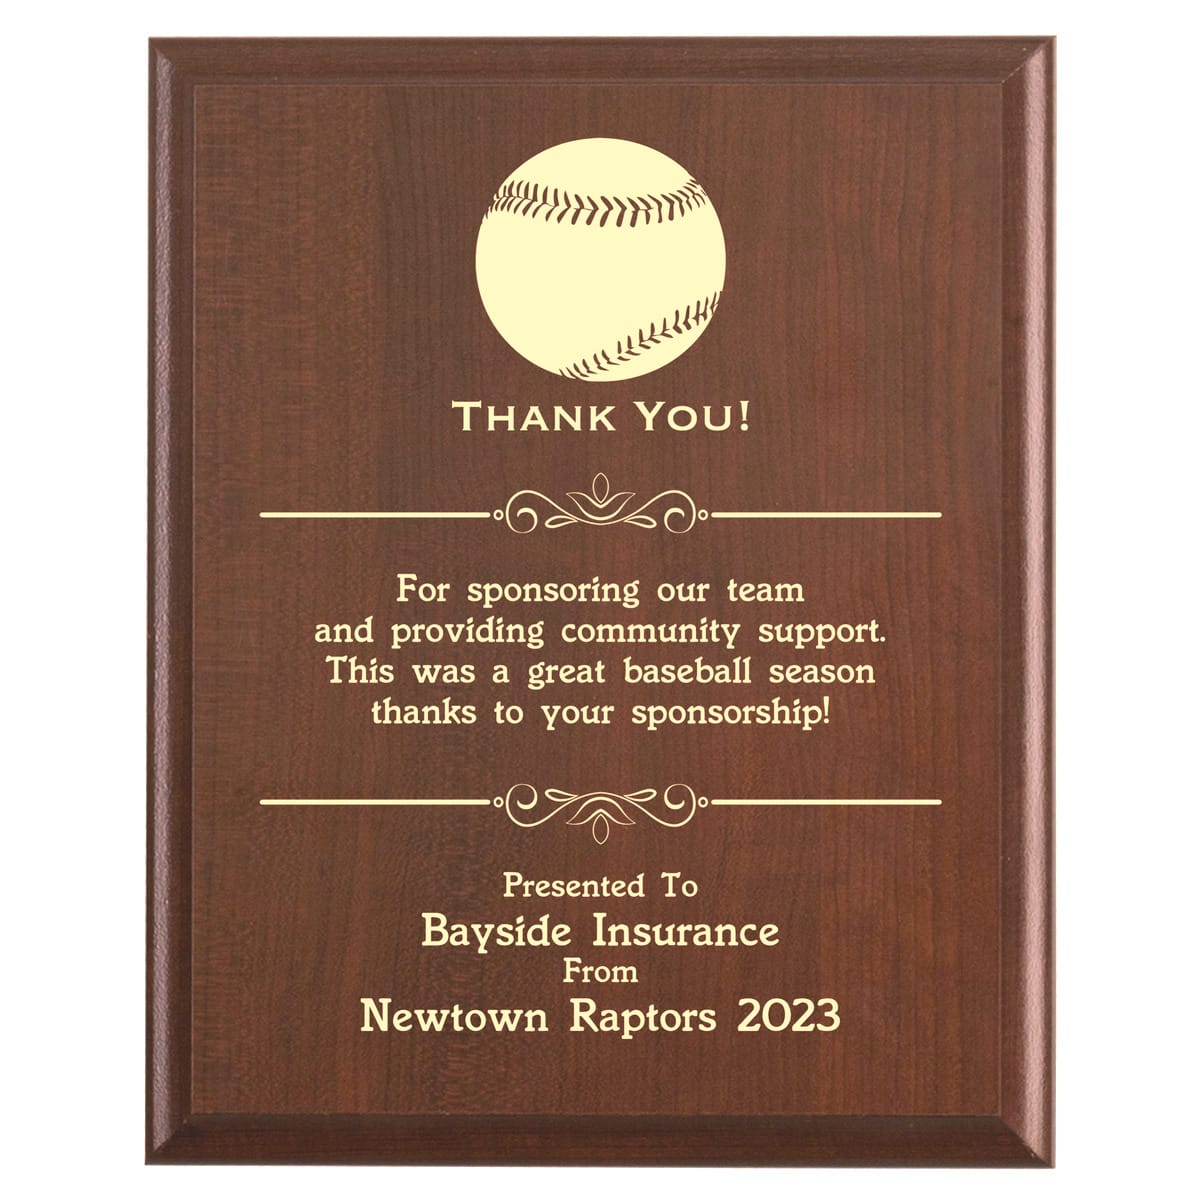 Plaque photo: Baseball Sponsor Thank You Gift design with free personalization. Wood style finish with customized text.